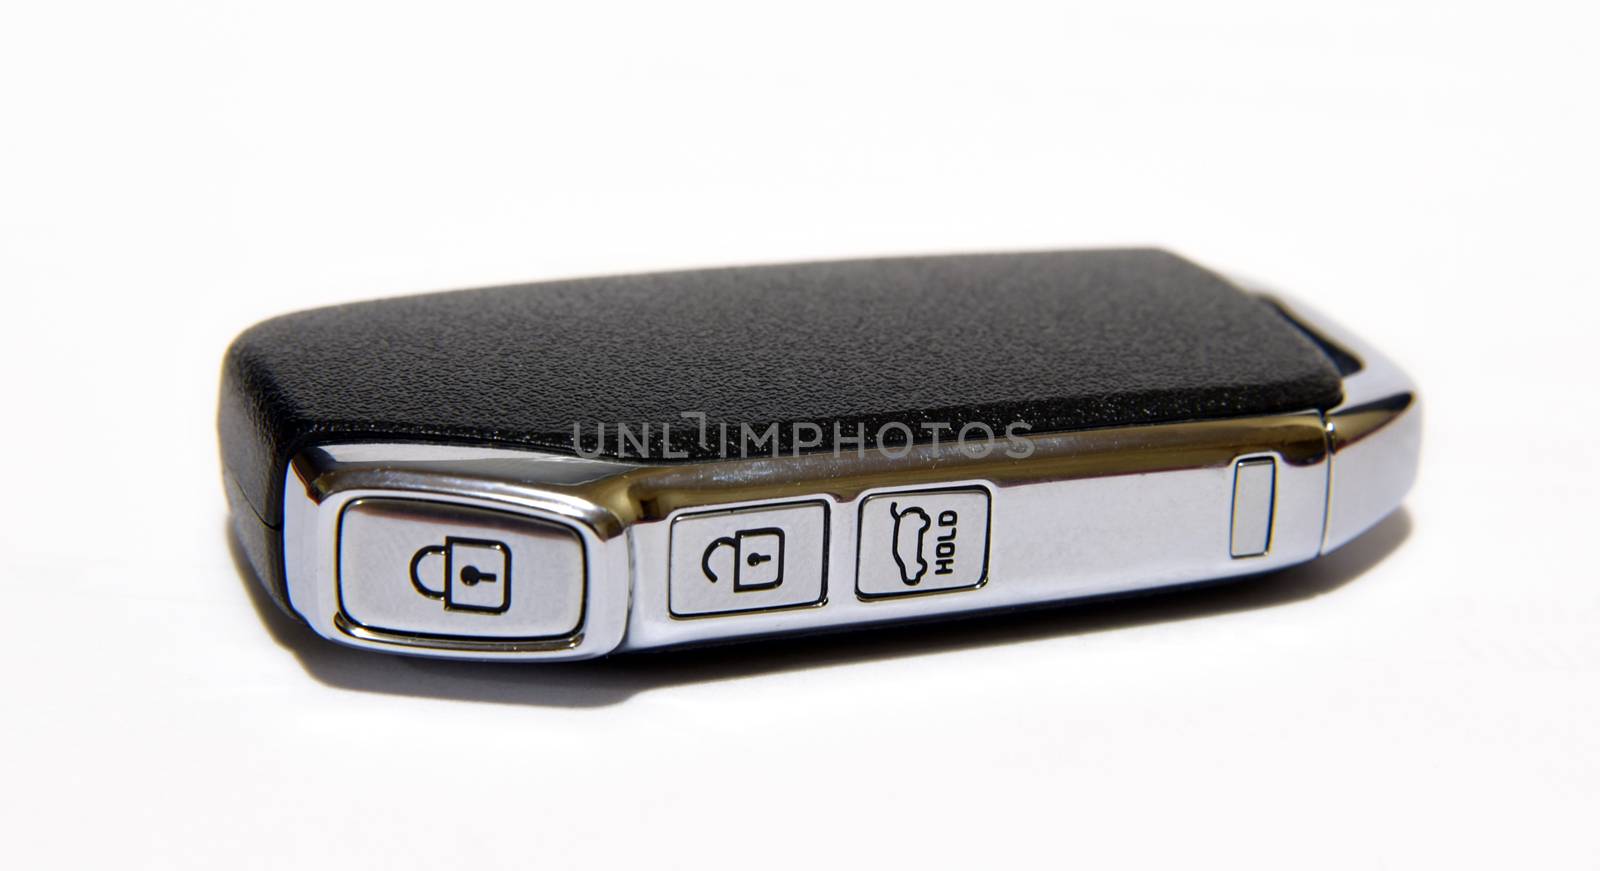 pop-up car key with remote central locking on white background